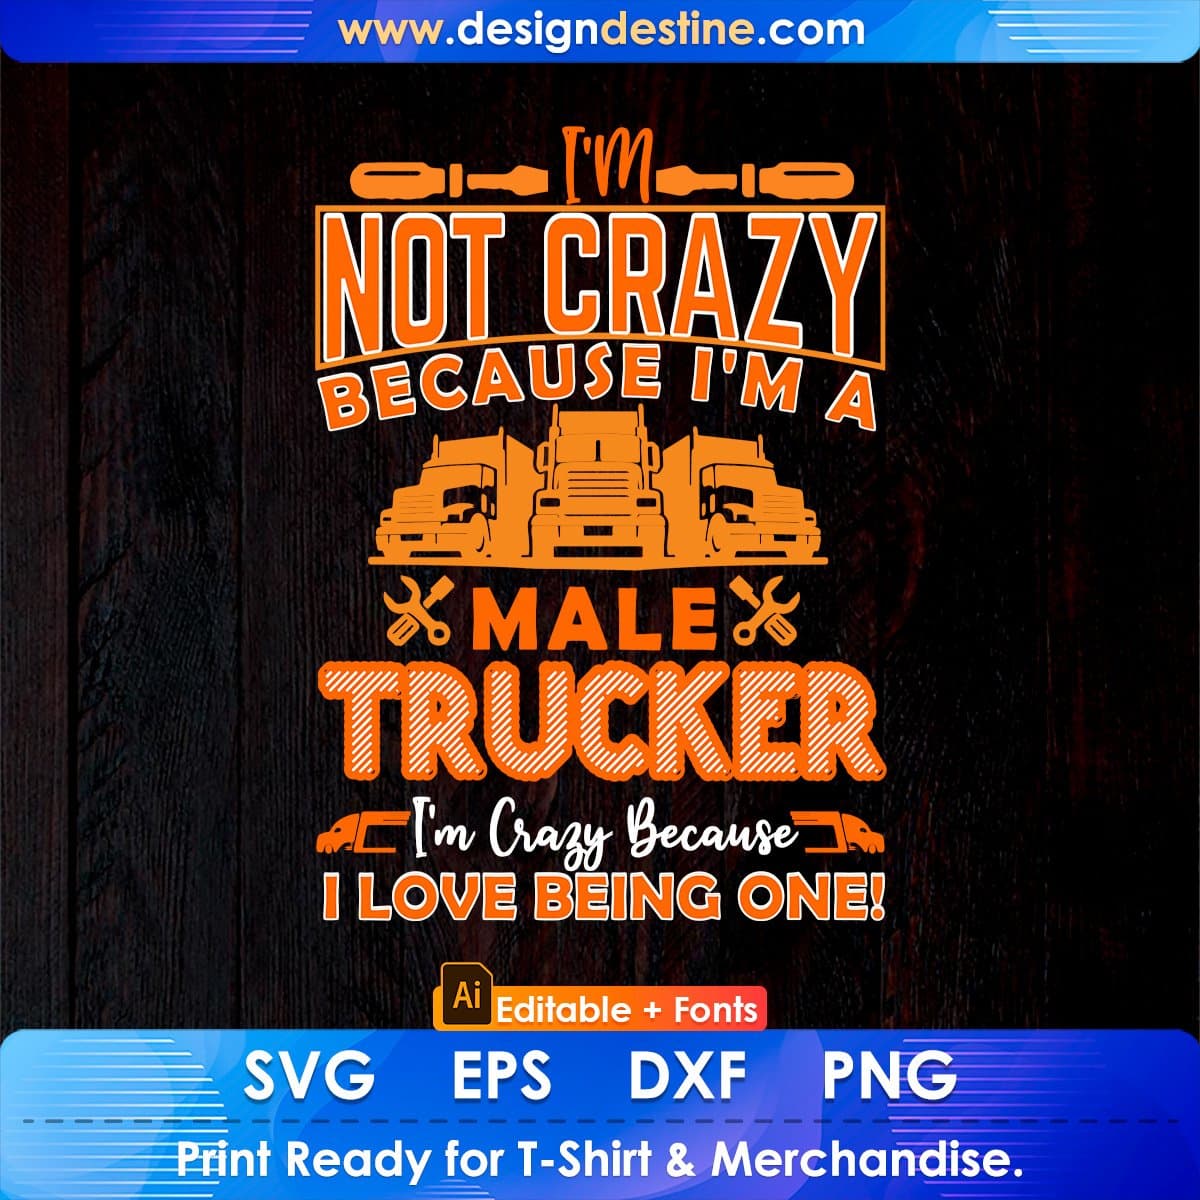 I'm Not Crazy Because I'm A Male American Trucker Editable T shirt Design In Ai Svg Files